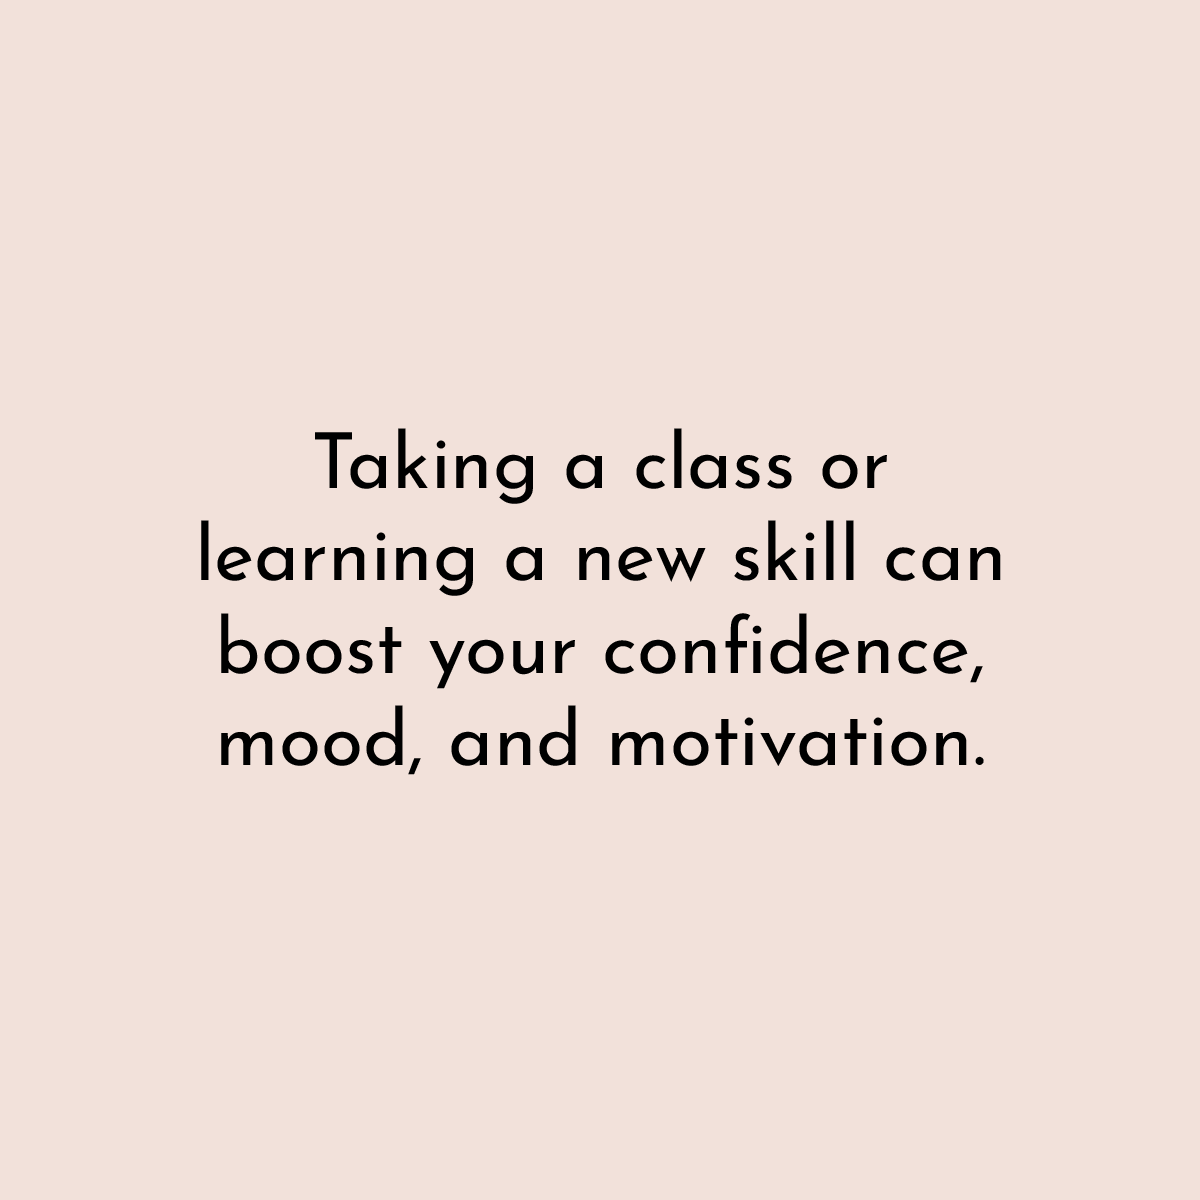 Taking a class or learning a new skill can boost your confidence, mood and motivation.